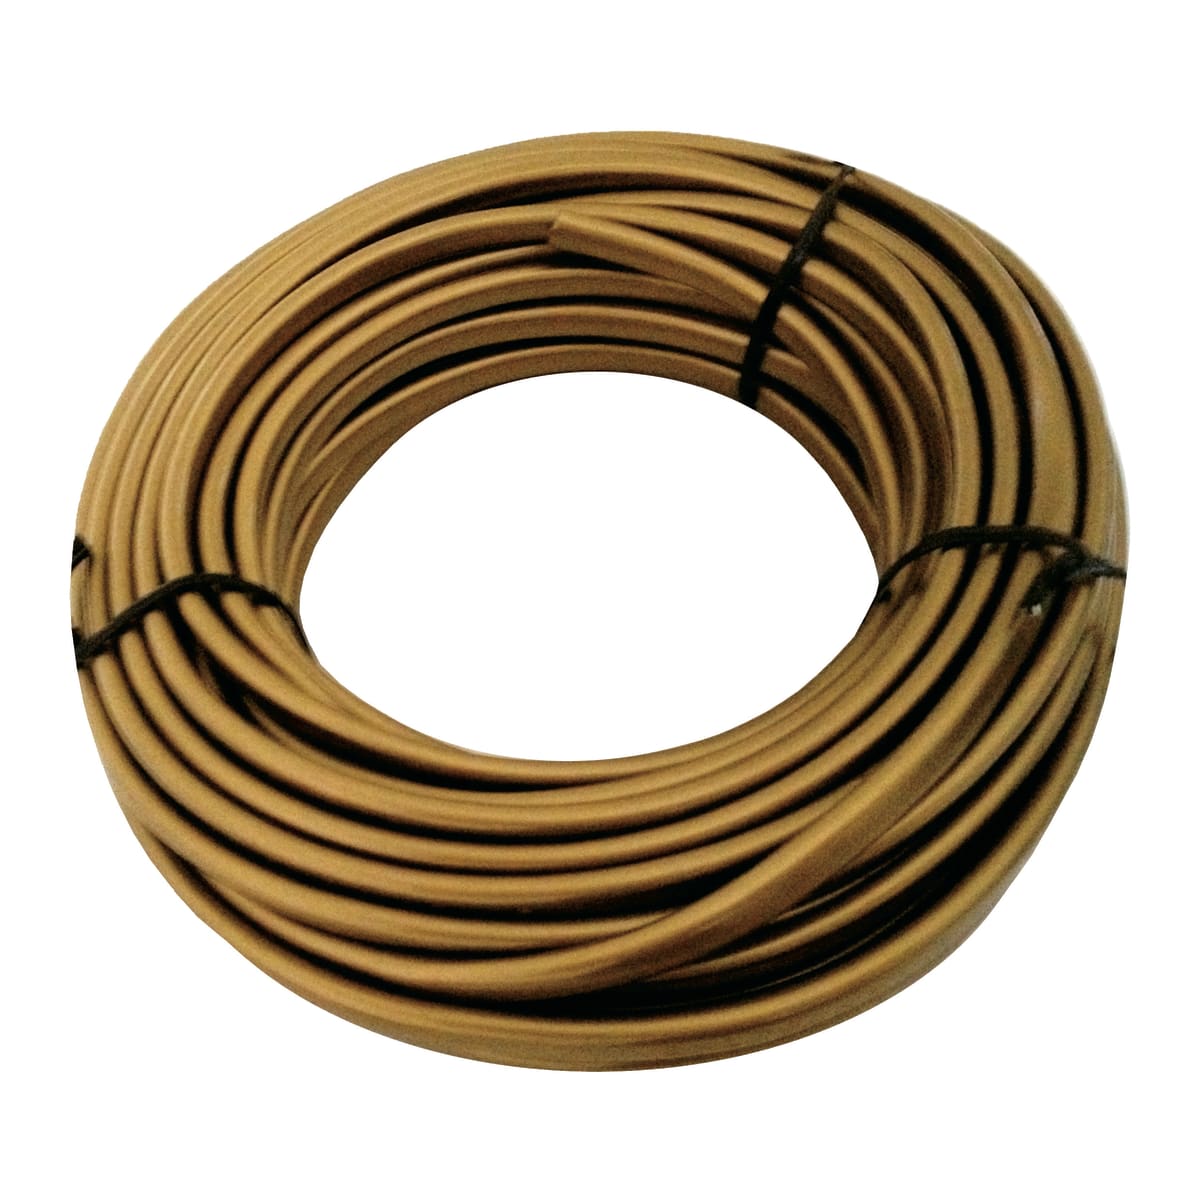 HANK ELECTRICAL CABLE H03VVH2F 2X0,75 10MT GOLD